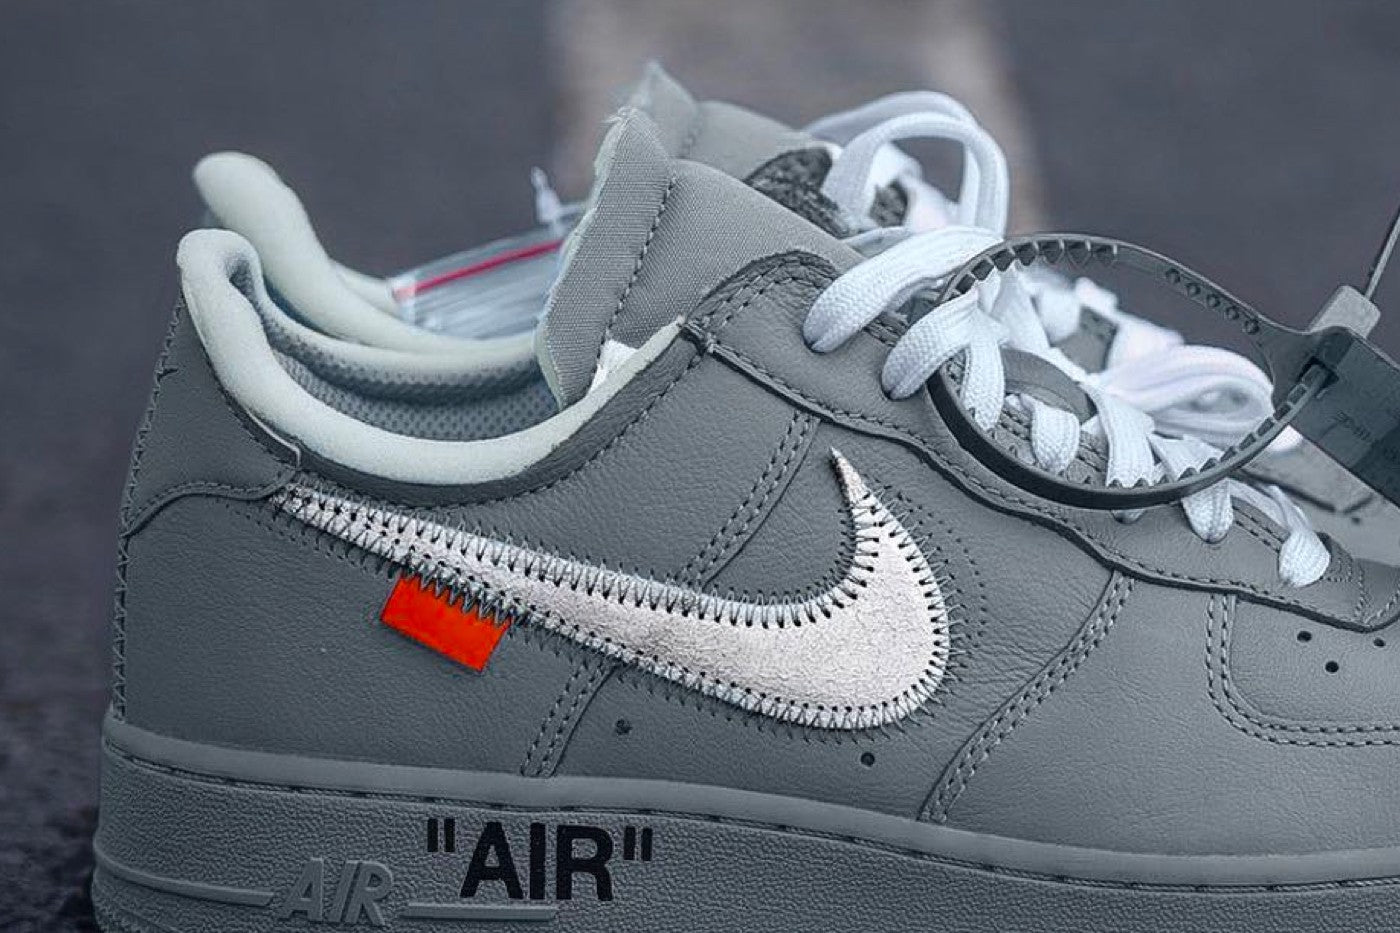 The Off-White x Nike Air Force 1 Low 